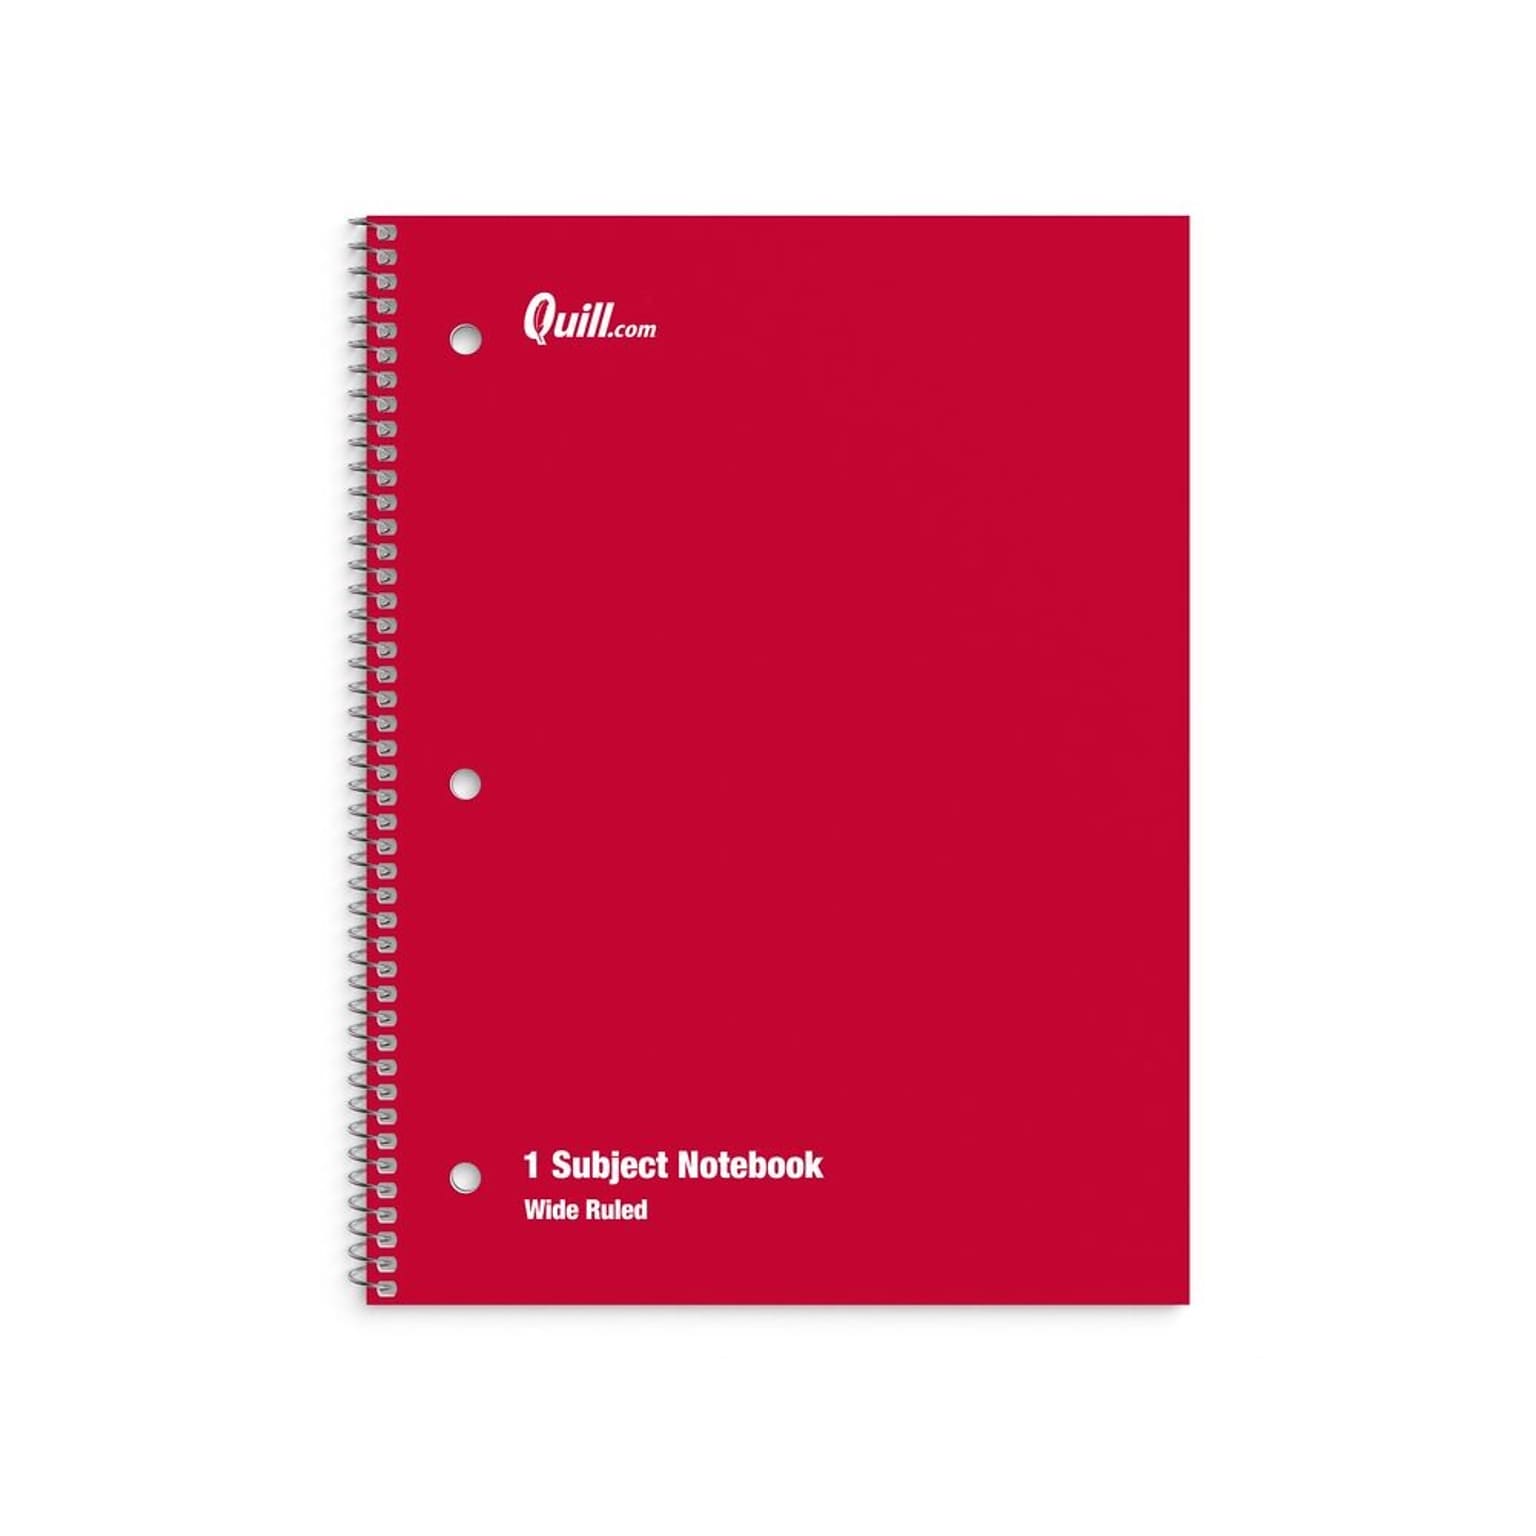 Quill Brand® Premium 1-Subject Notebook, 8 x 10.5, Wide Ruled, 70 Sheets, Assorted Colors (27615M-CC)